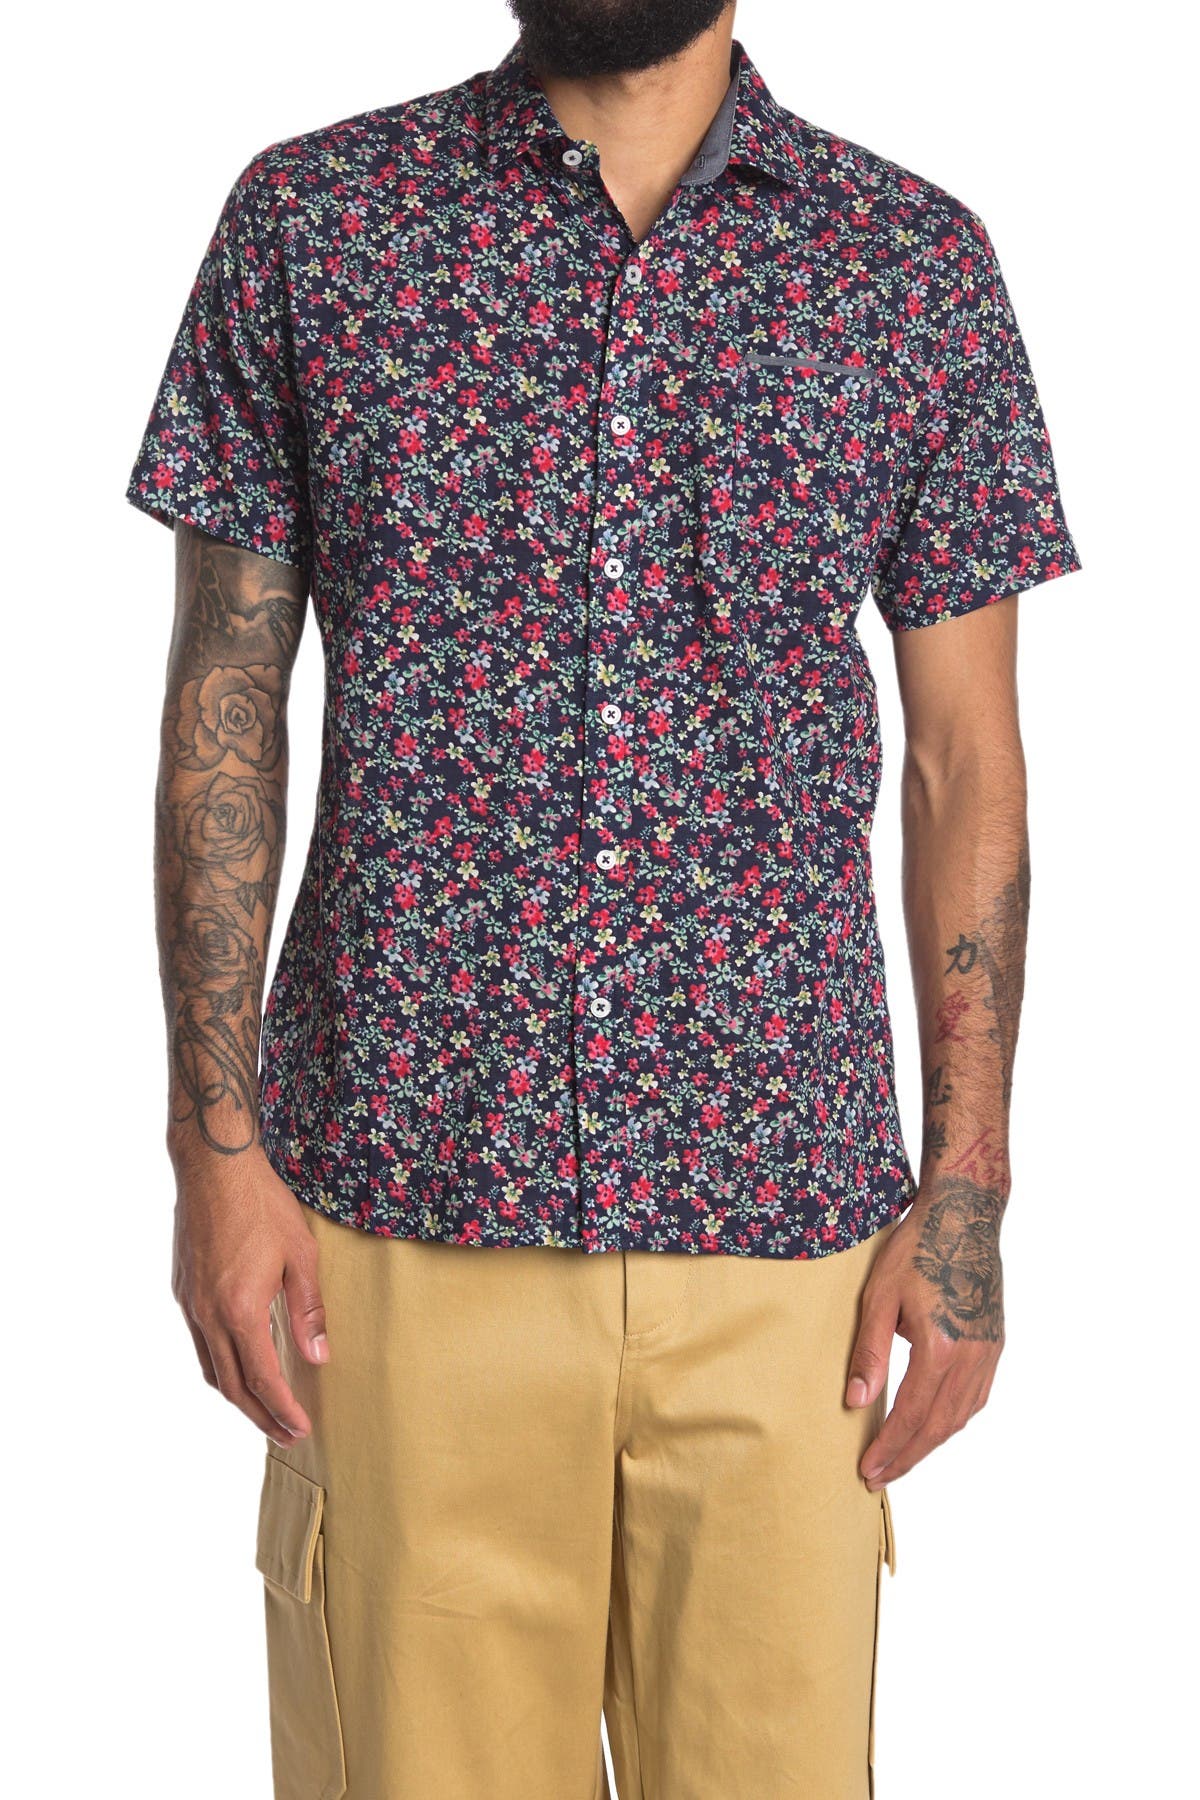 Impatient Wolves Fior Floral Button Down Shirt In Navy1